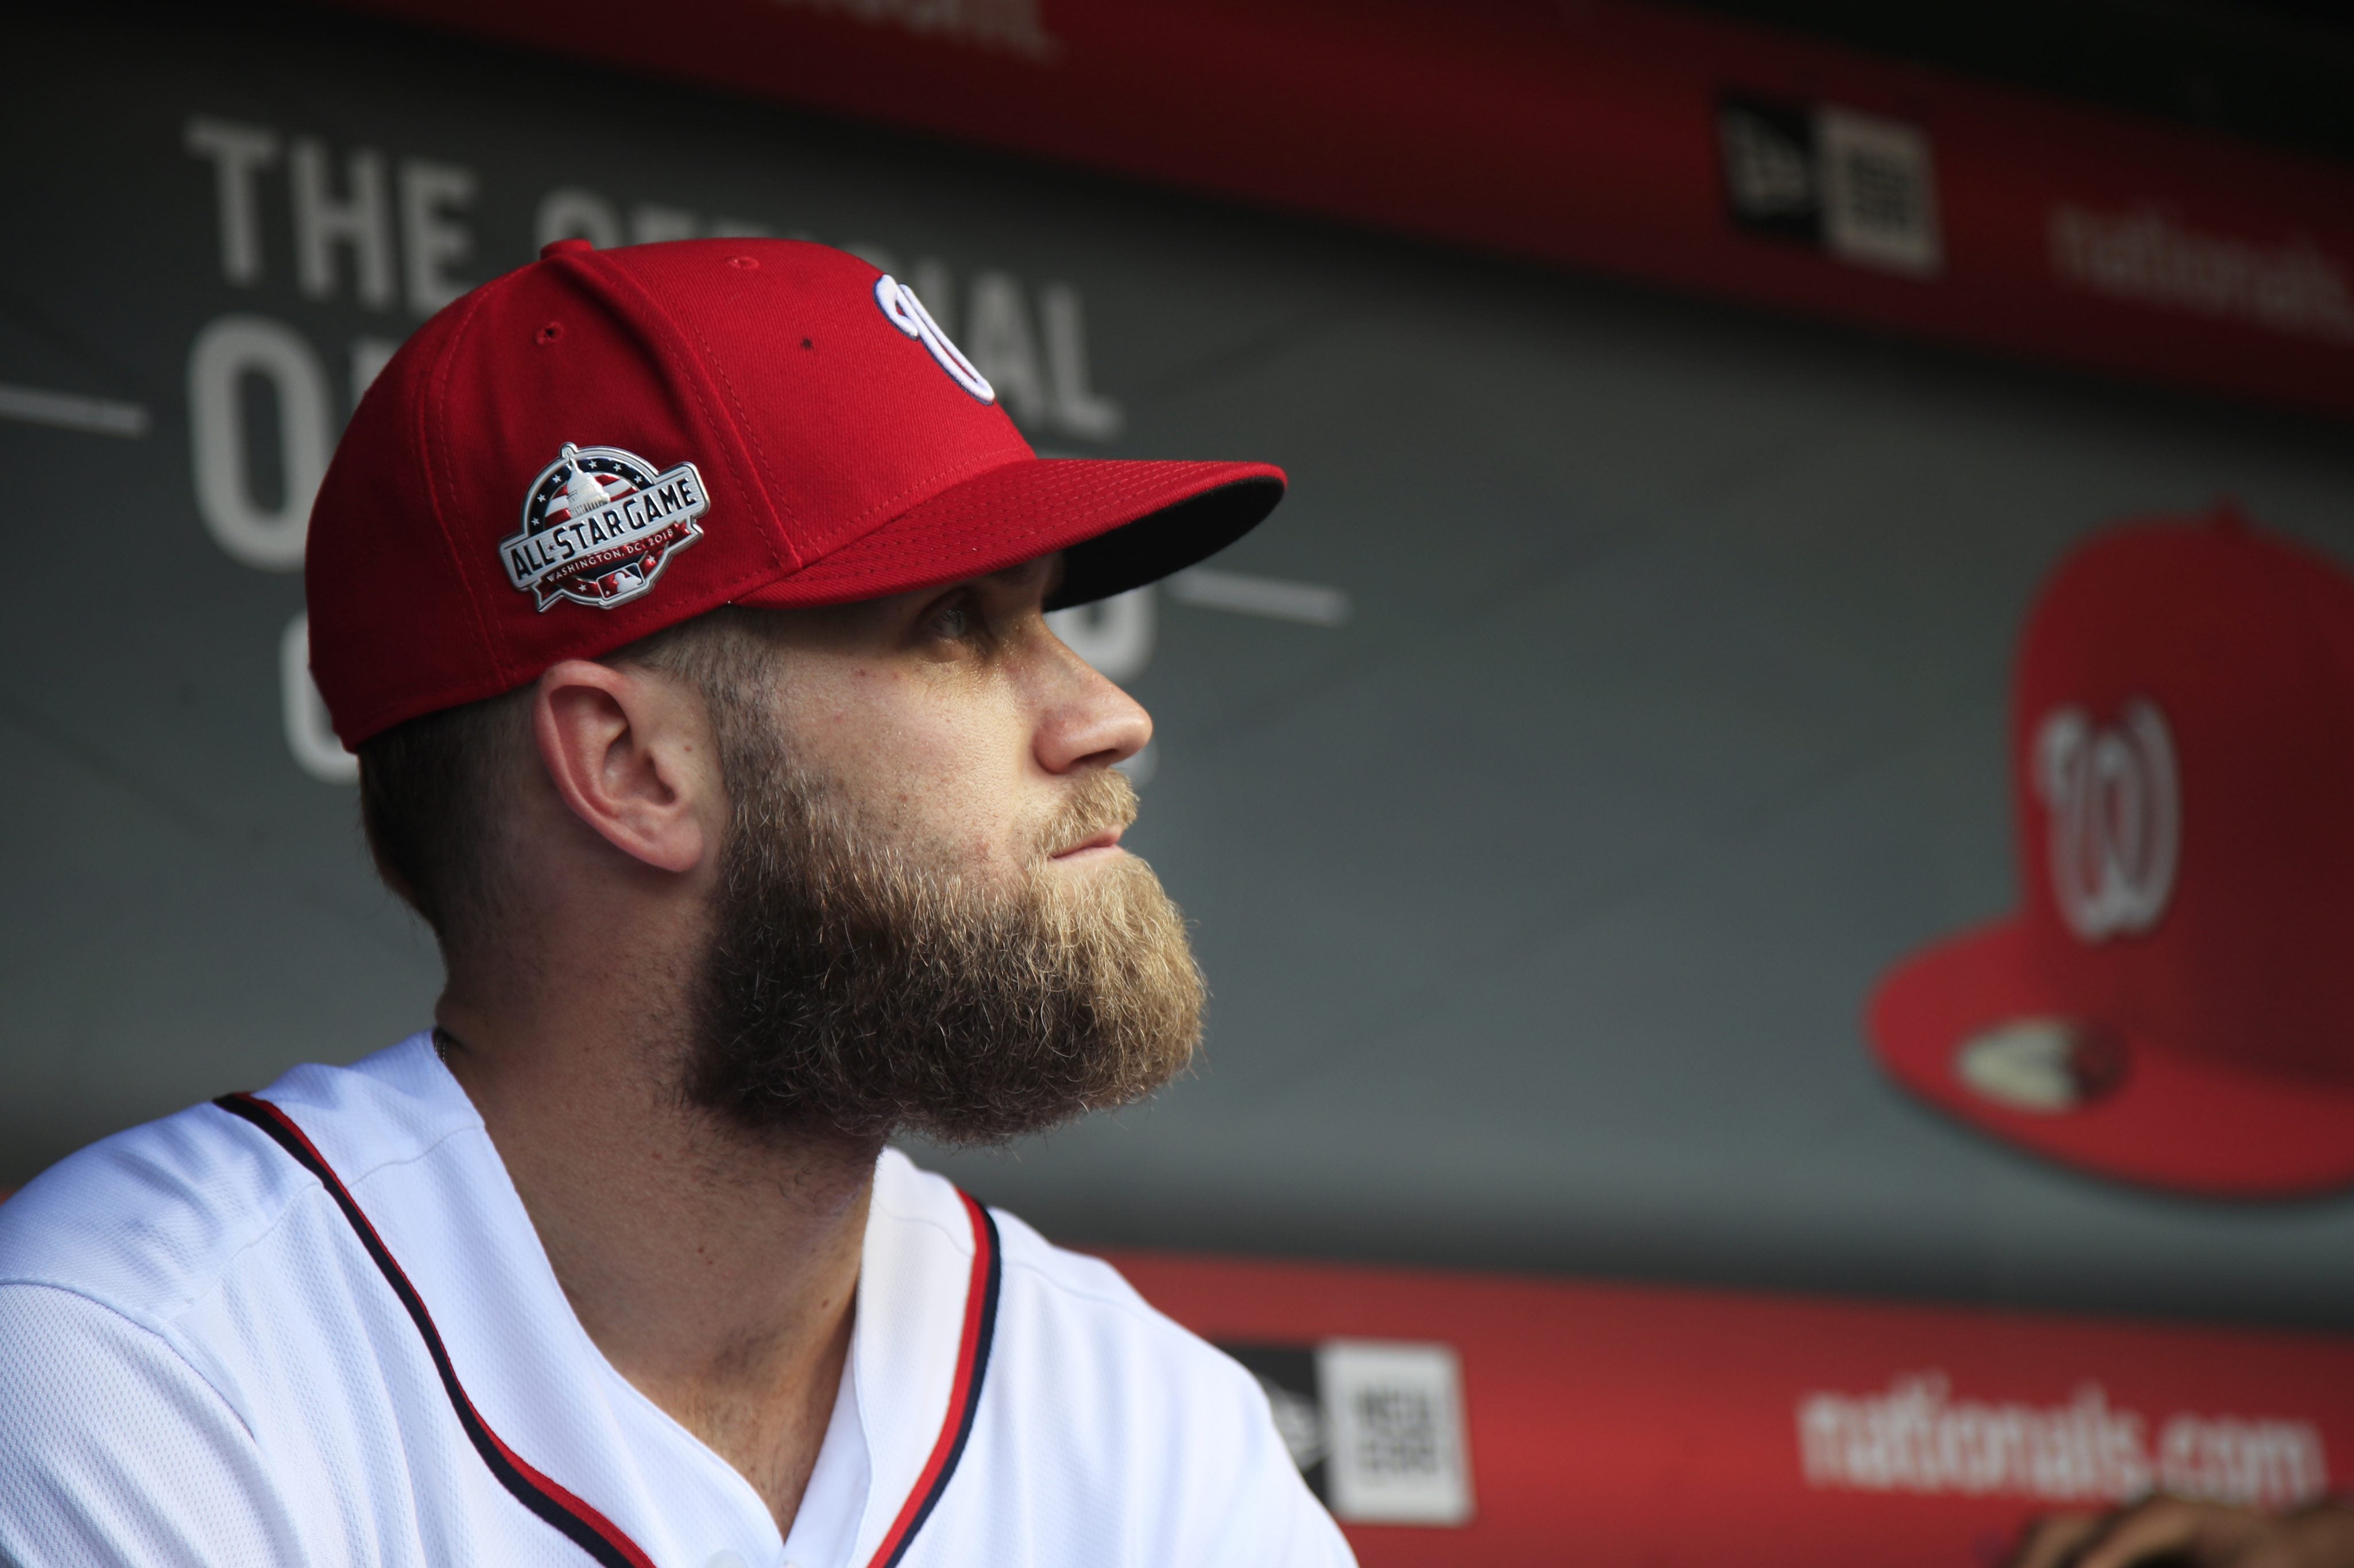 Bryce Harper wants a new jersey for the Washington Nationals